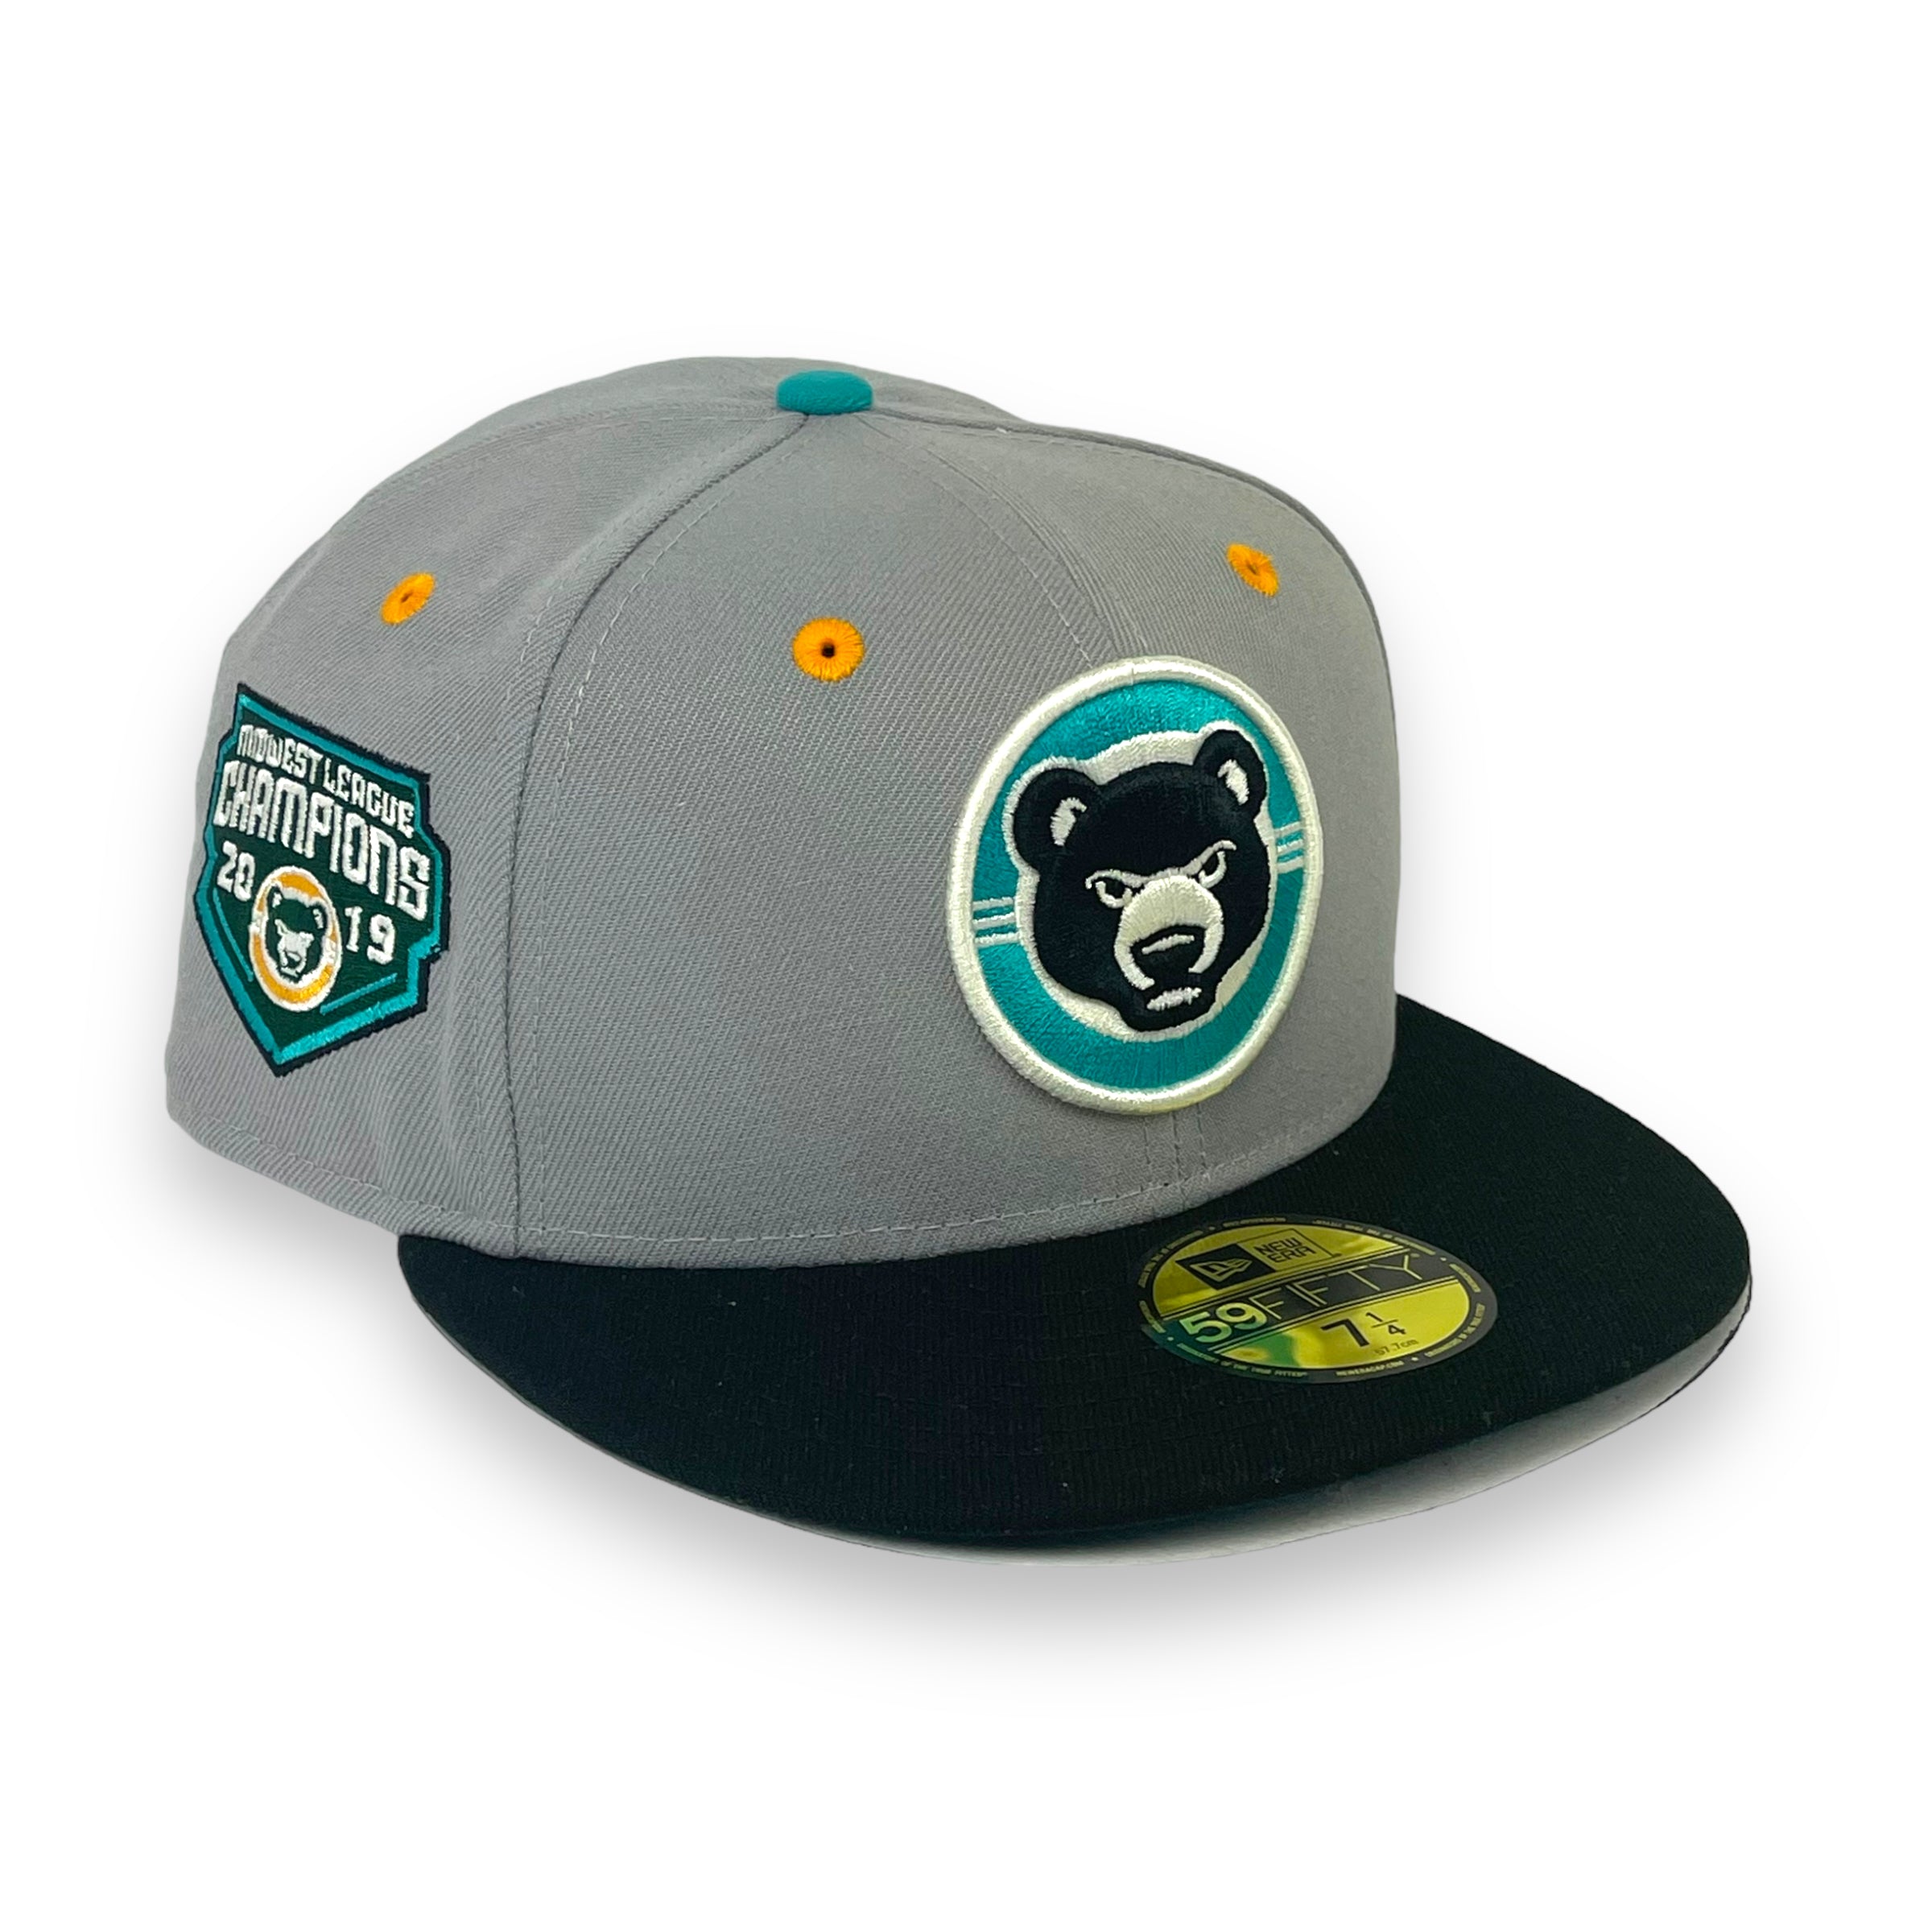 SOUTH BEND CUBS (MIDWEST LEAGUE 2019 CHAMPIONS) NEW ERA 59FIFTY FITTED